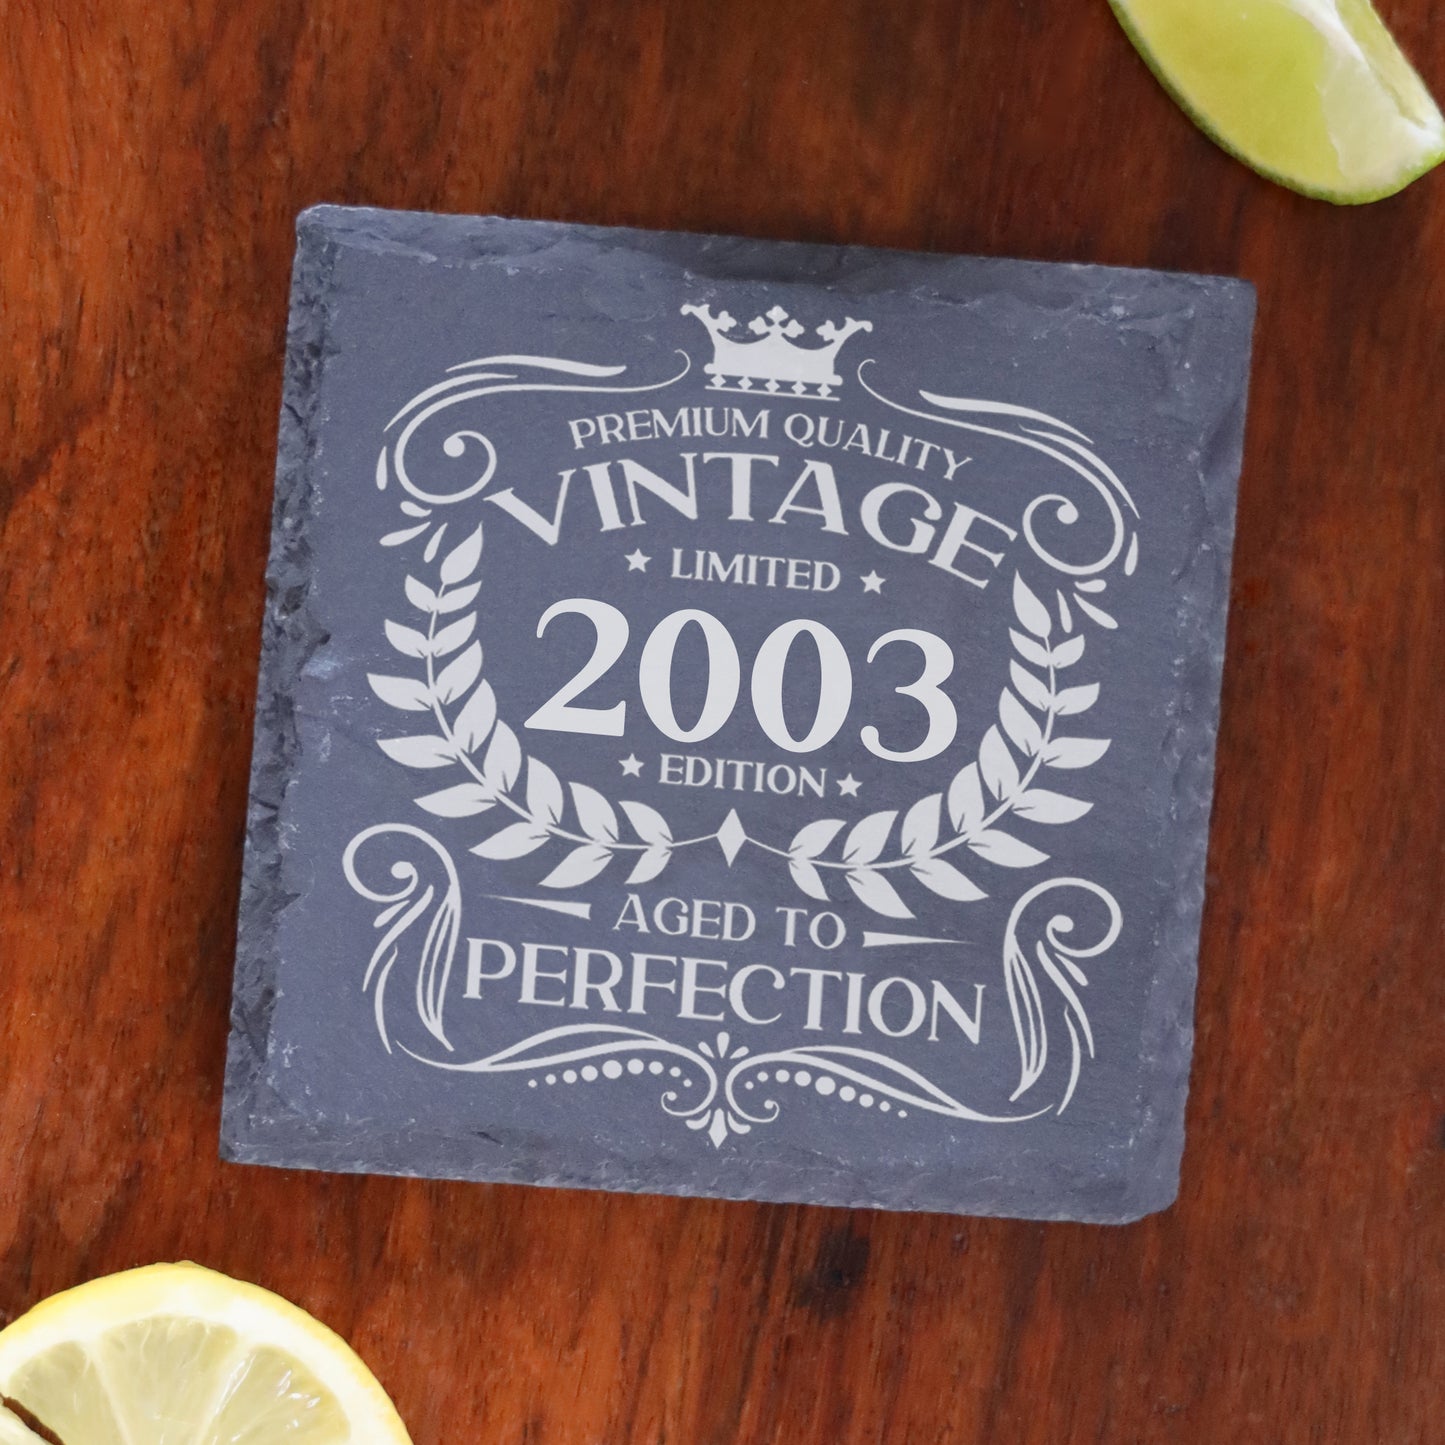 Personalised Vintage 2003 Mug and/or Coaster  - Always Looking Good - Square Coaster On Its Own  